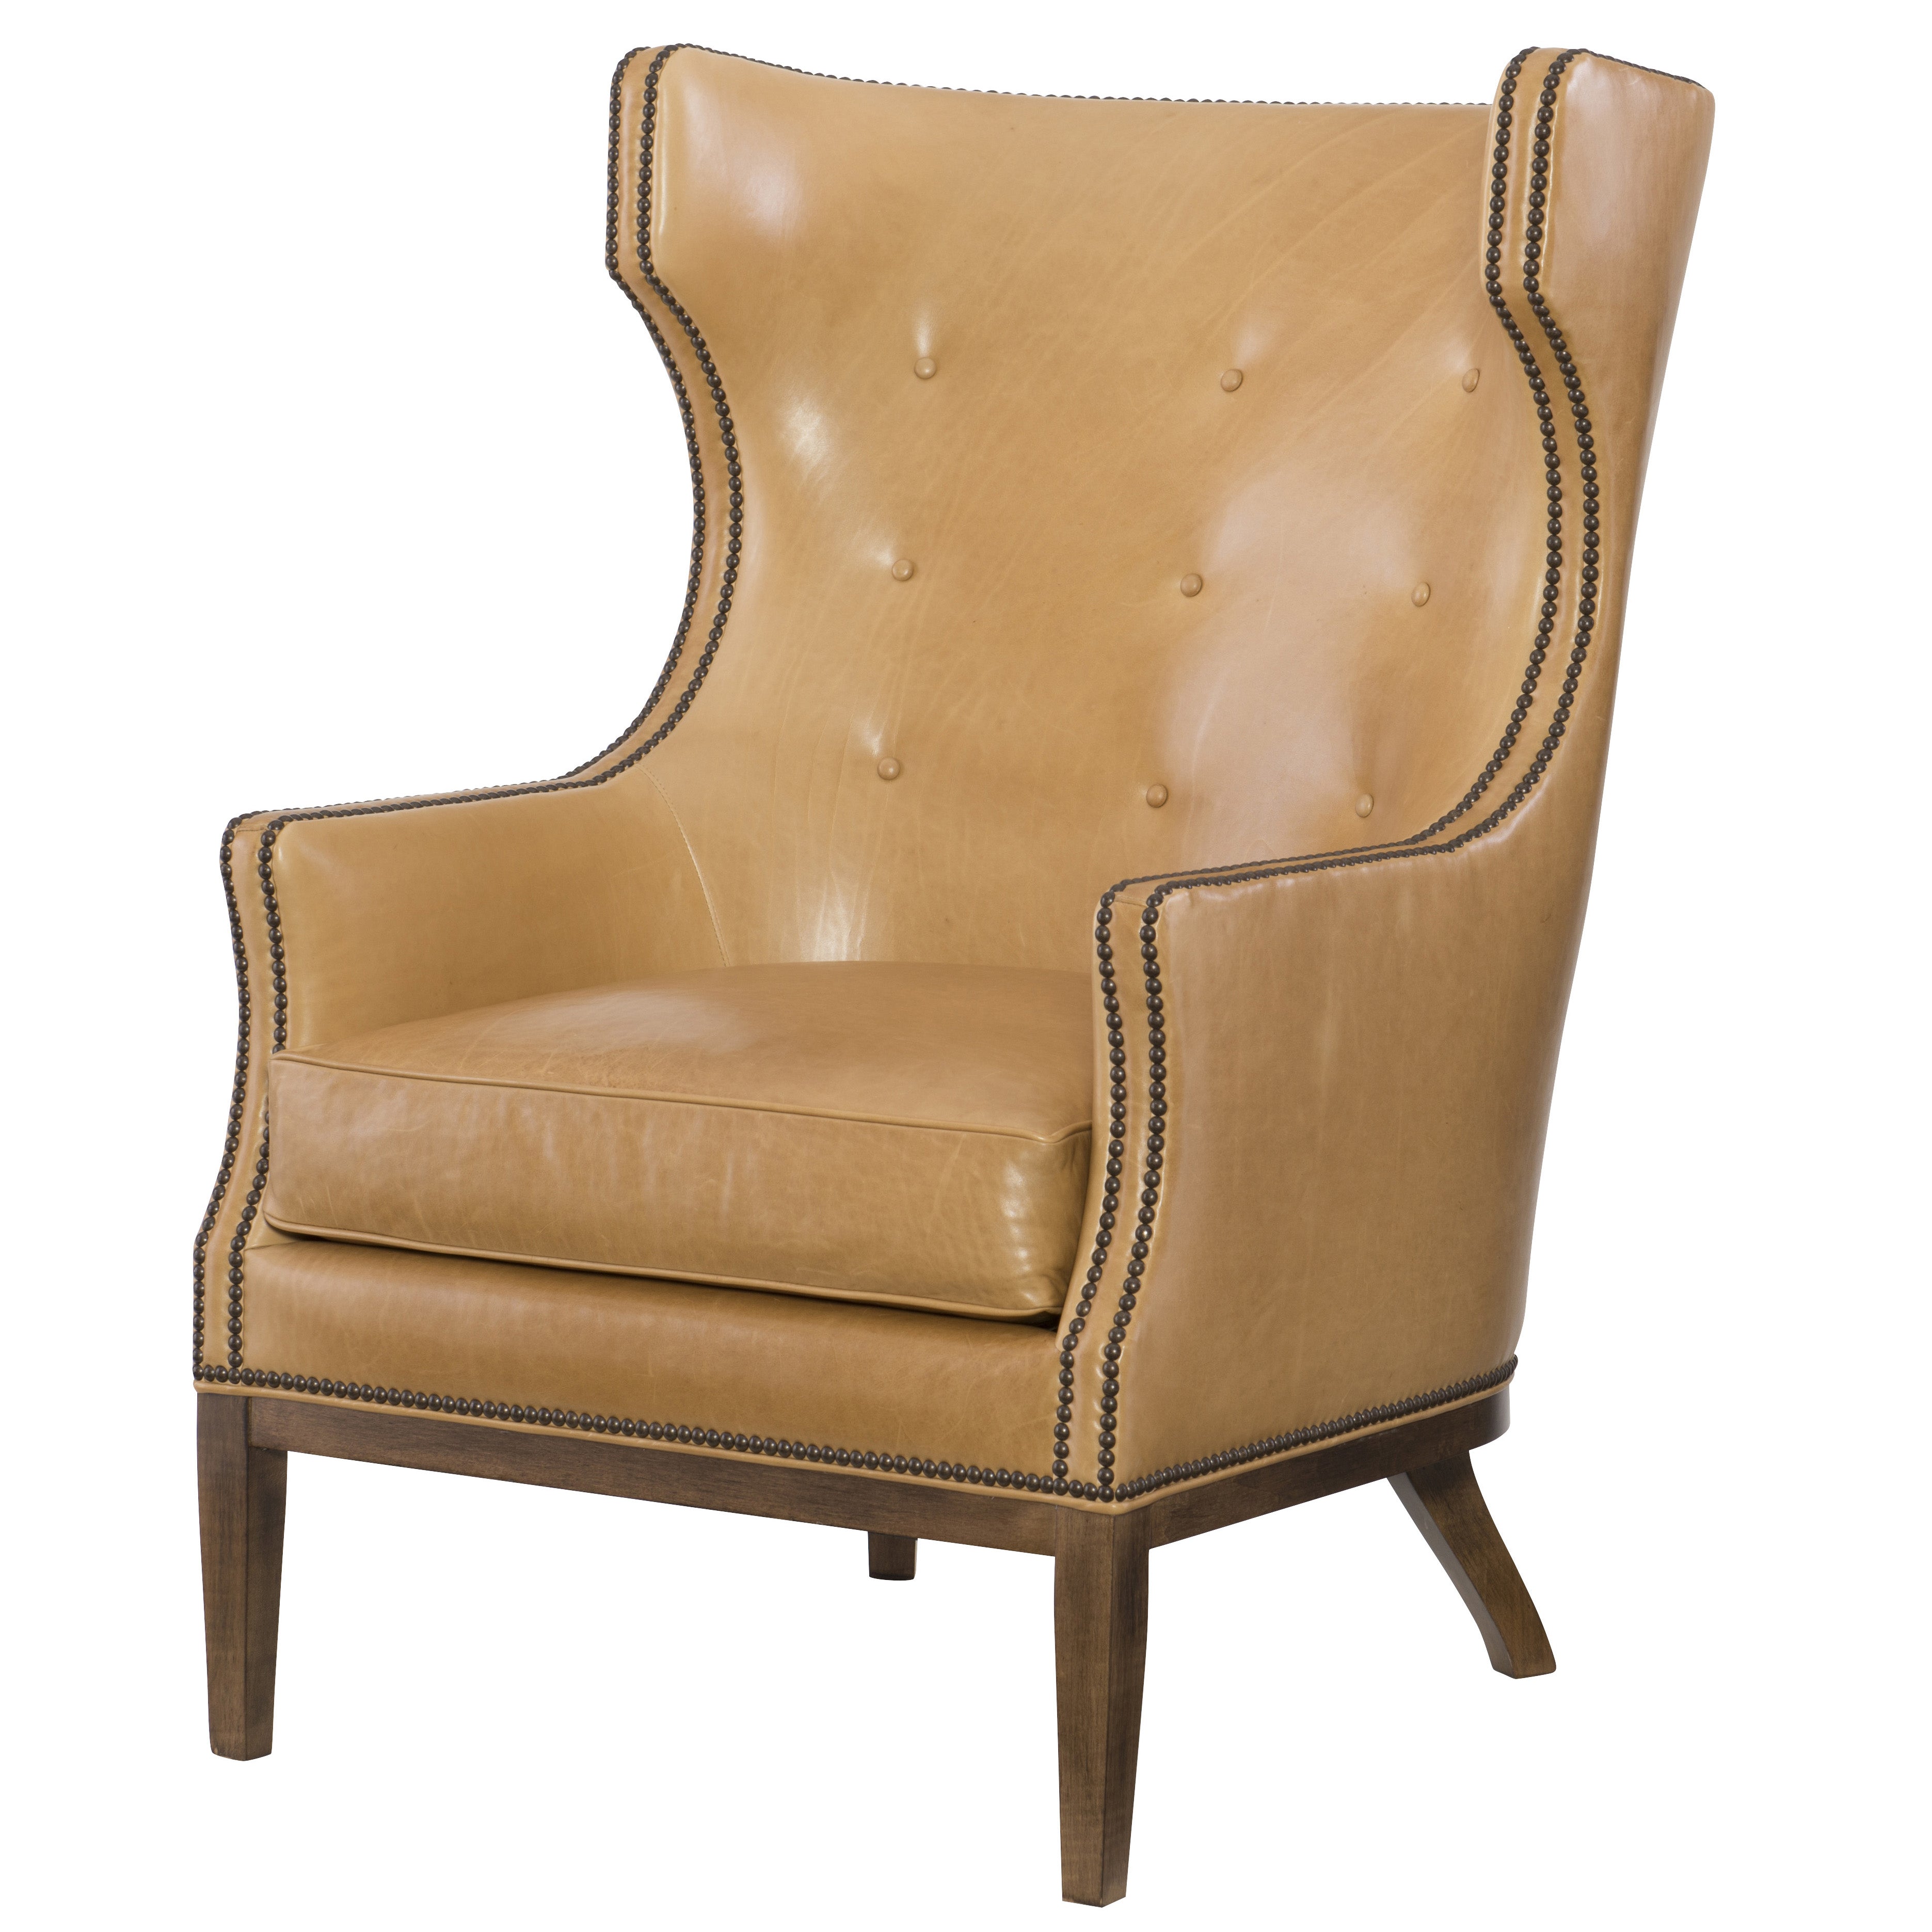 Scout Leather Chair by Wesley Hall shown in Giles Fawn leather